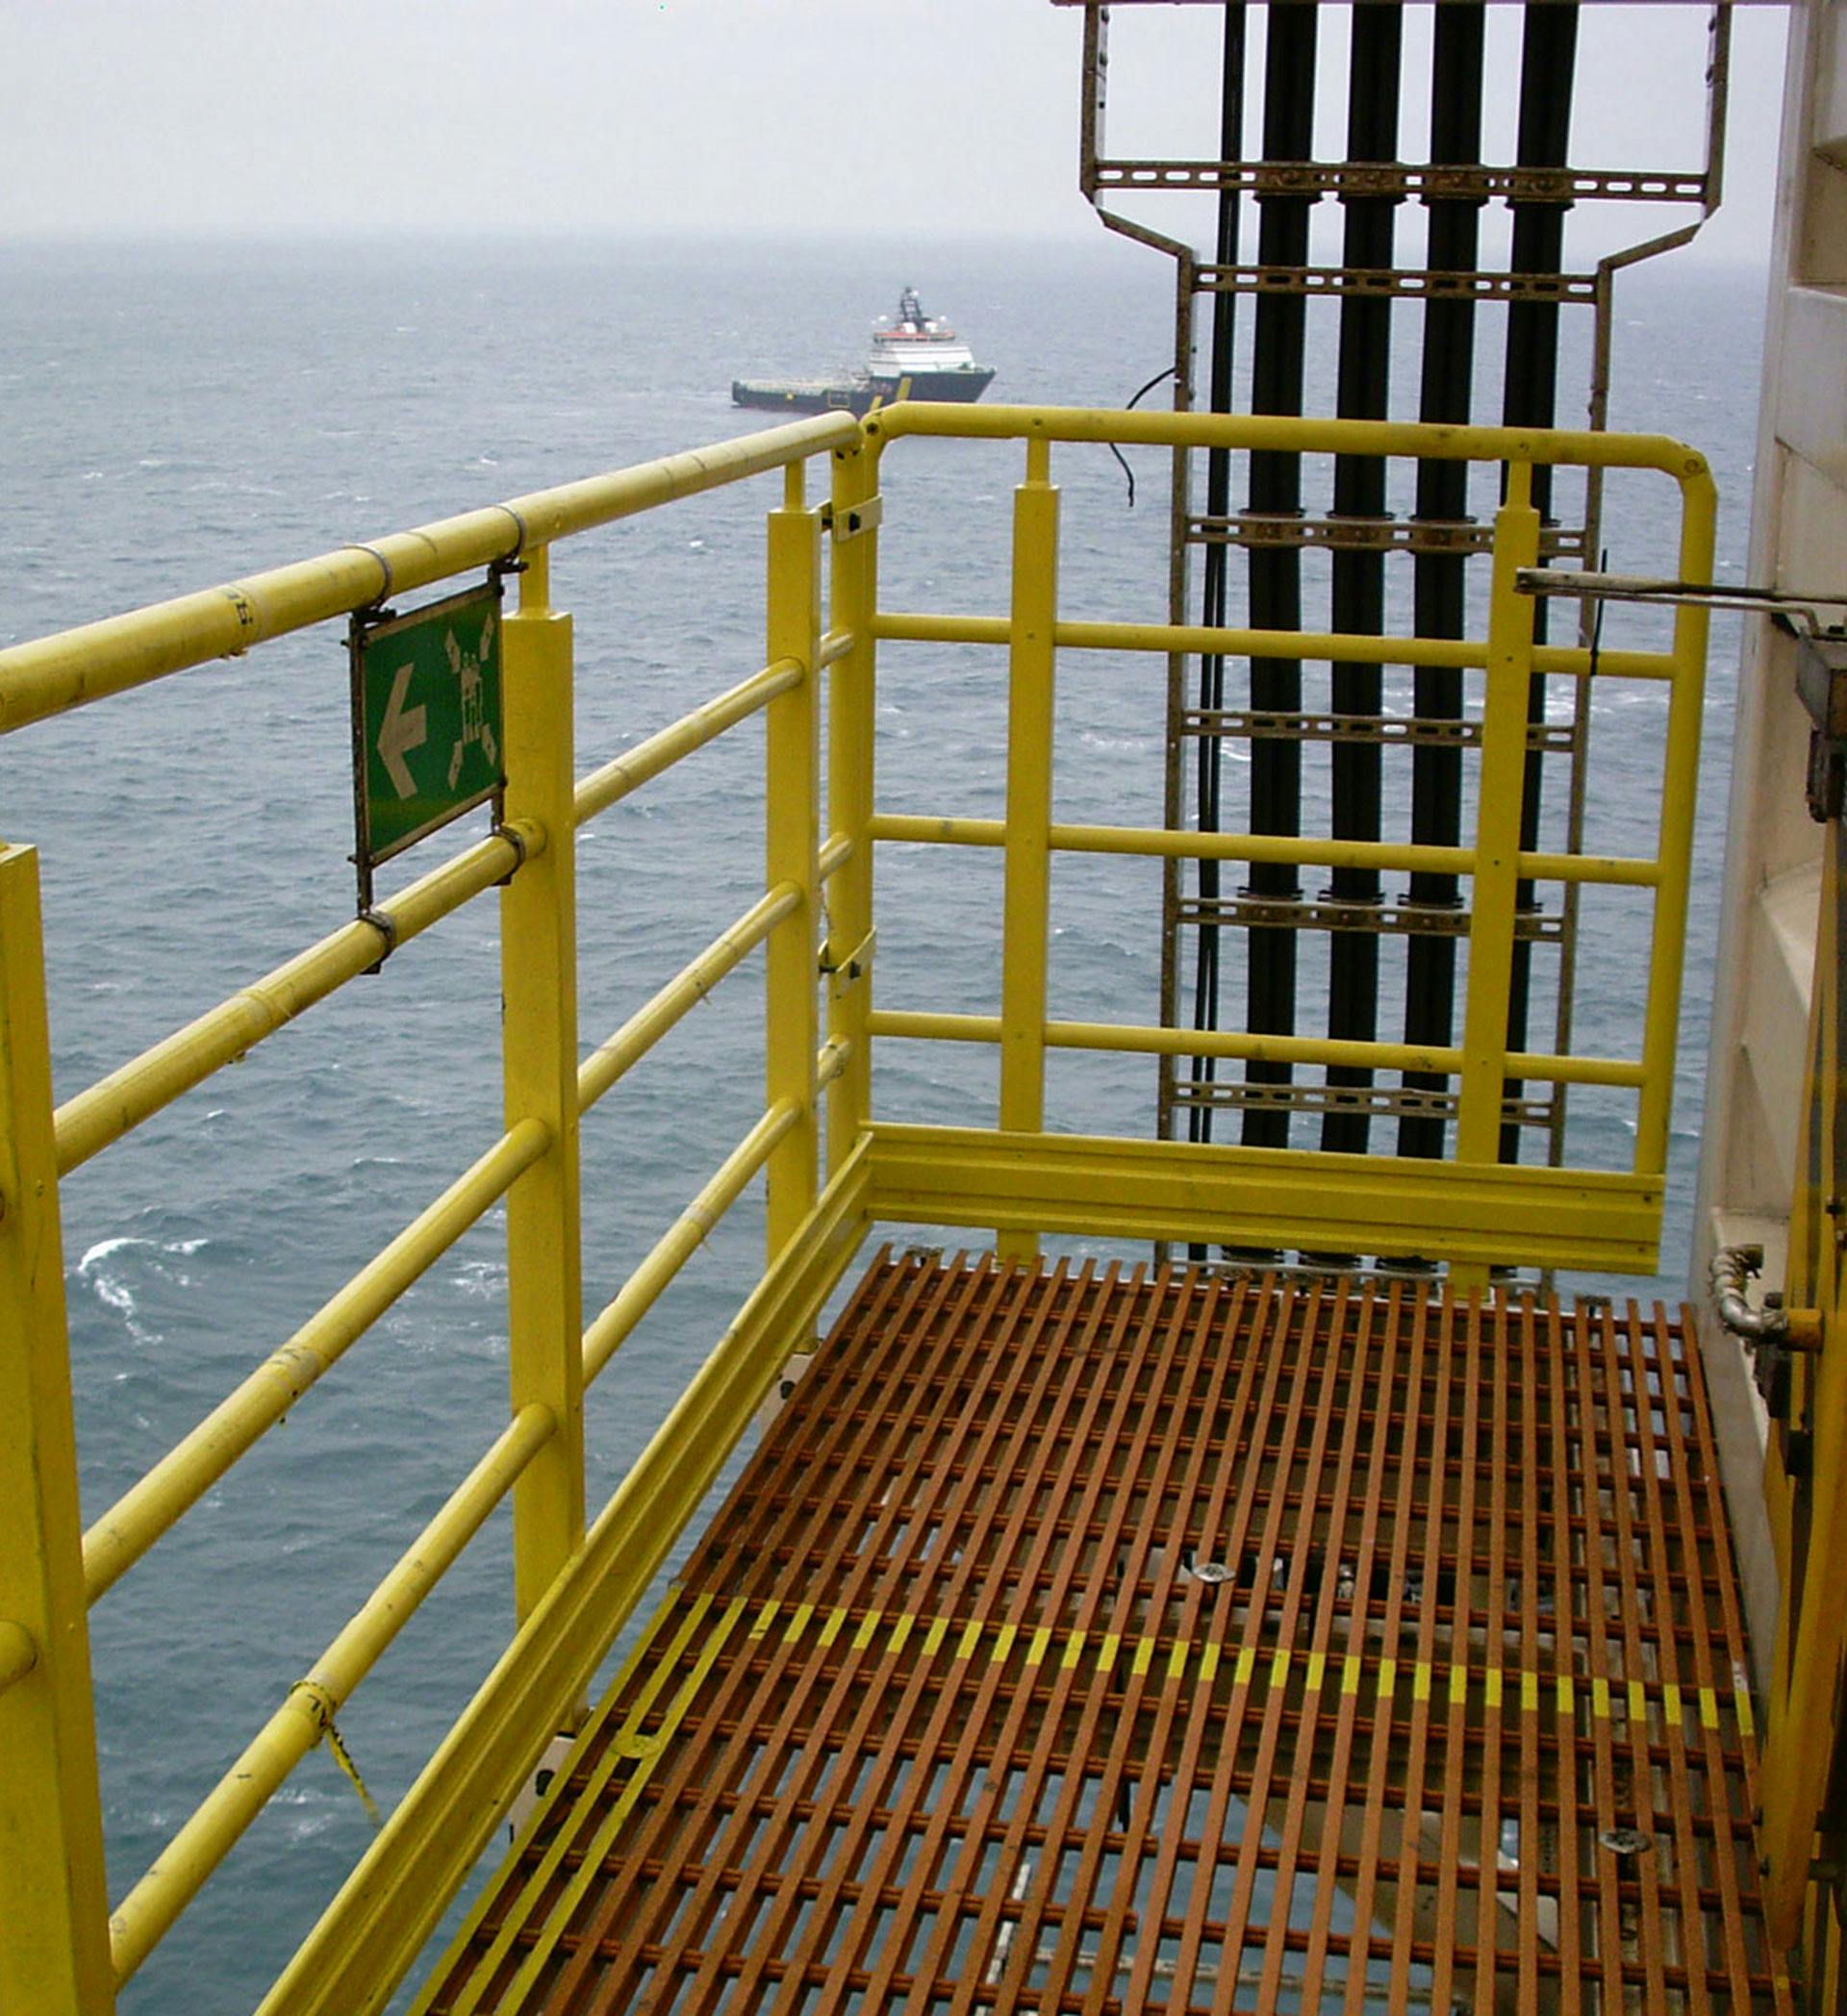 MARRS FRP handrail and phenolic grating, with ocean in the background